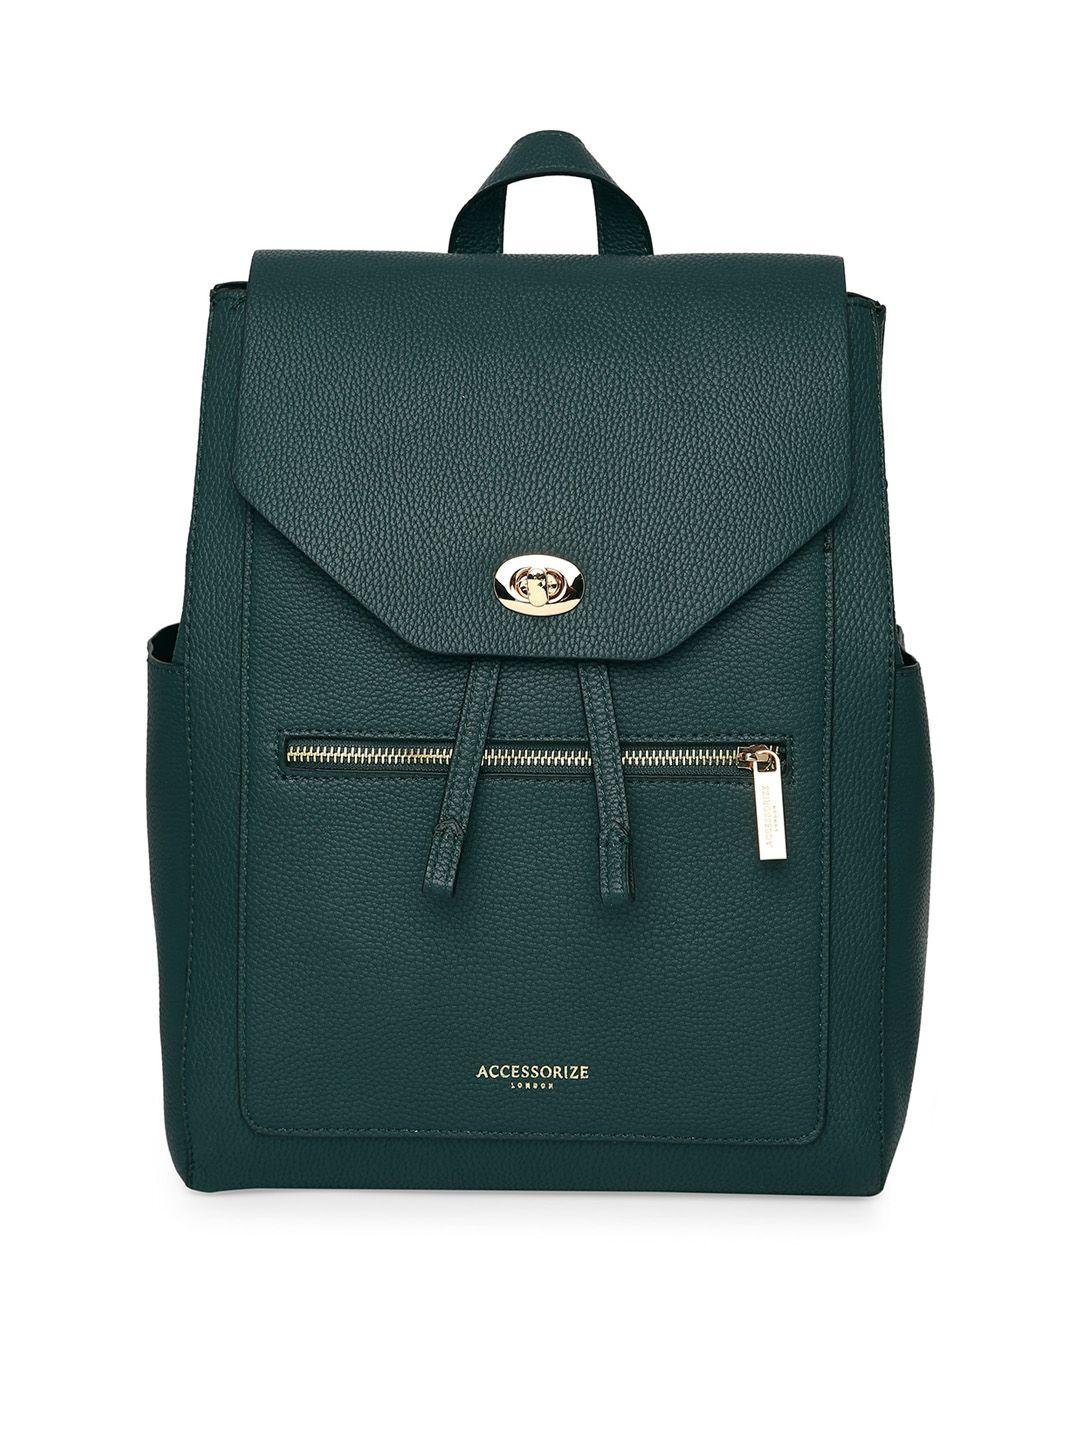 accessorize women teal backpack